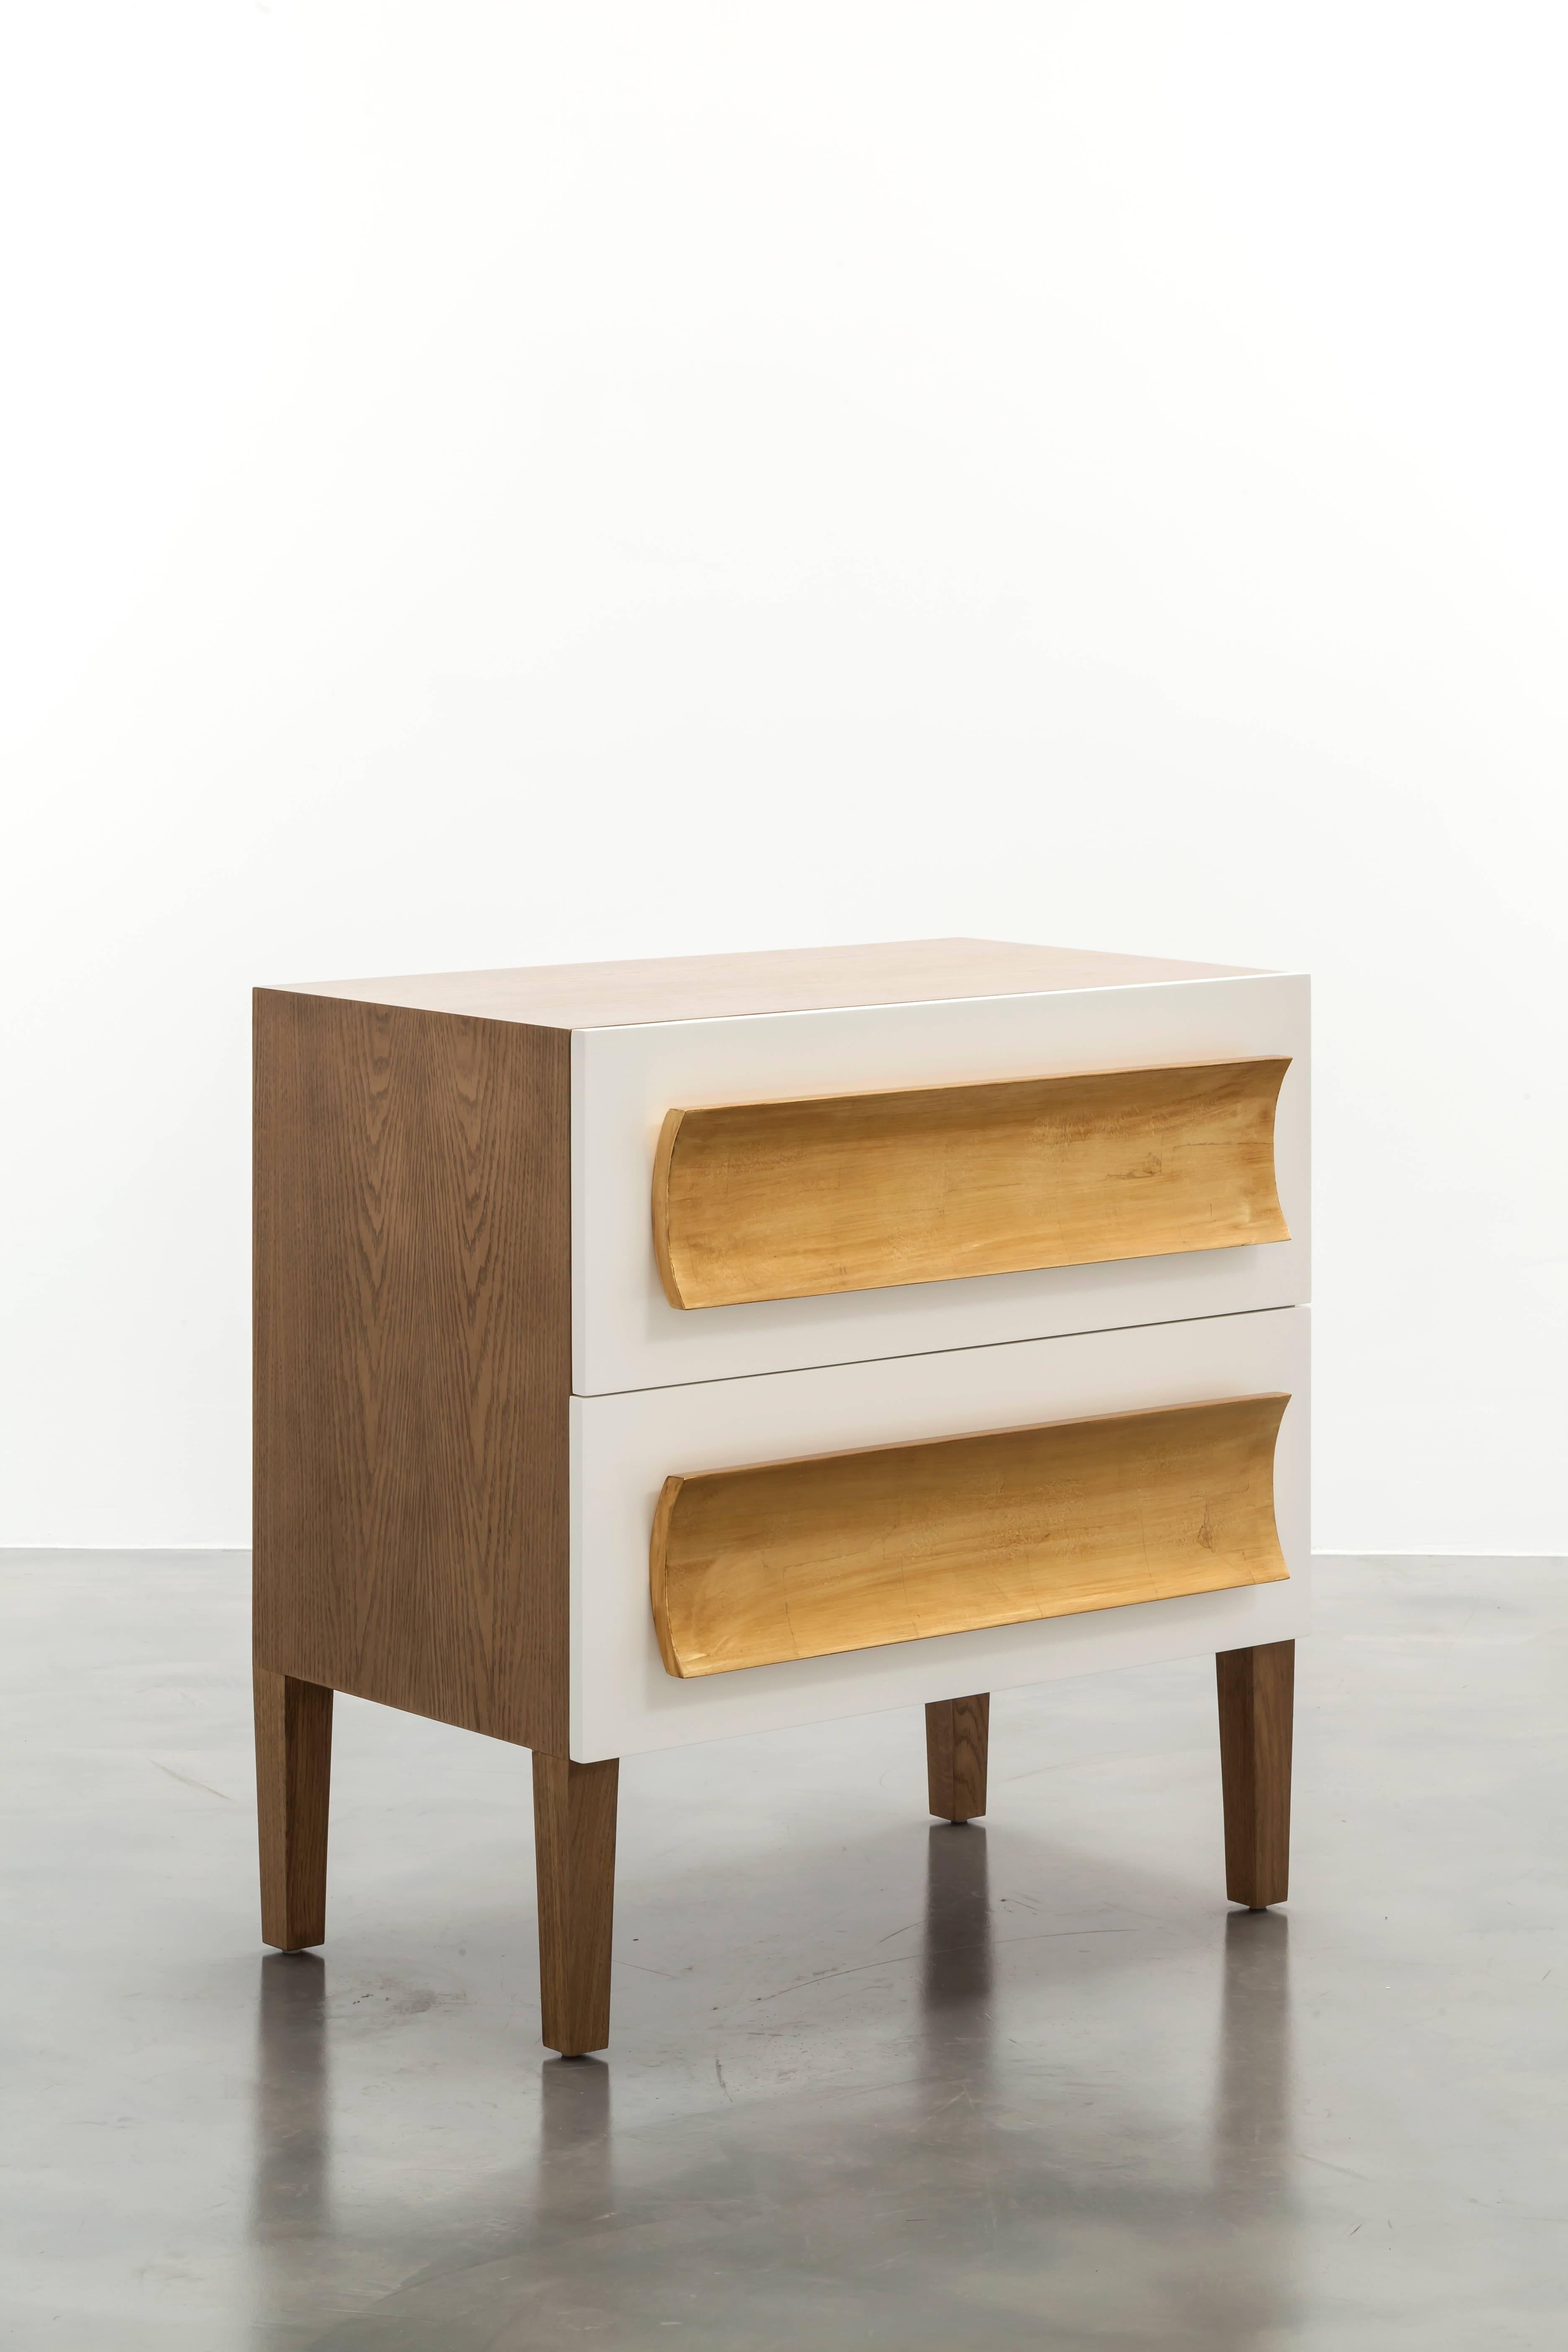 RECAMIER NIGHTSTAND - Modern Oak Nightstand with Gold Leaf Hand-Carved Details

The Recamier nightstand is a beautifully designed piece of furniture that features a mixed finish design with an oak body, lacquer drawer fronts, and gold-leaf